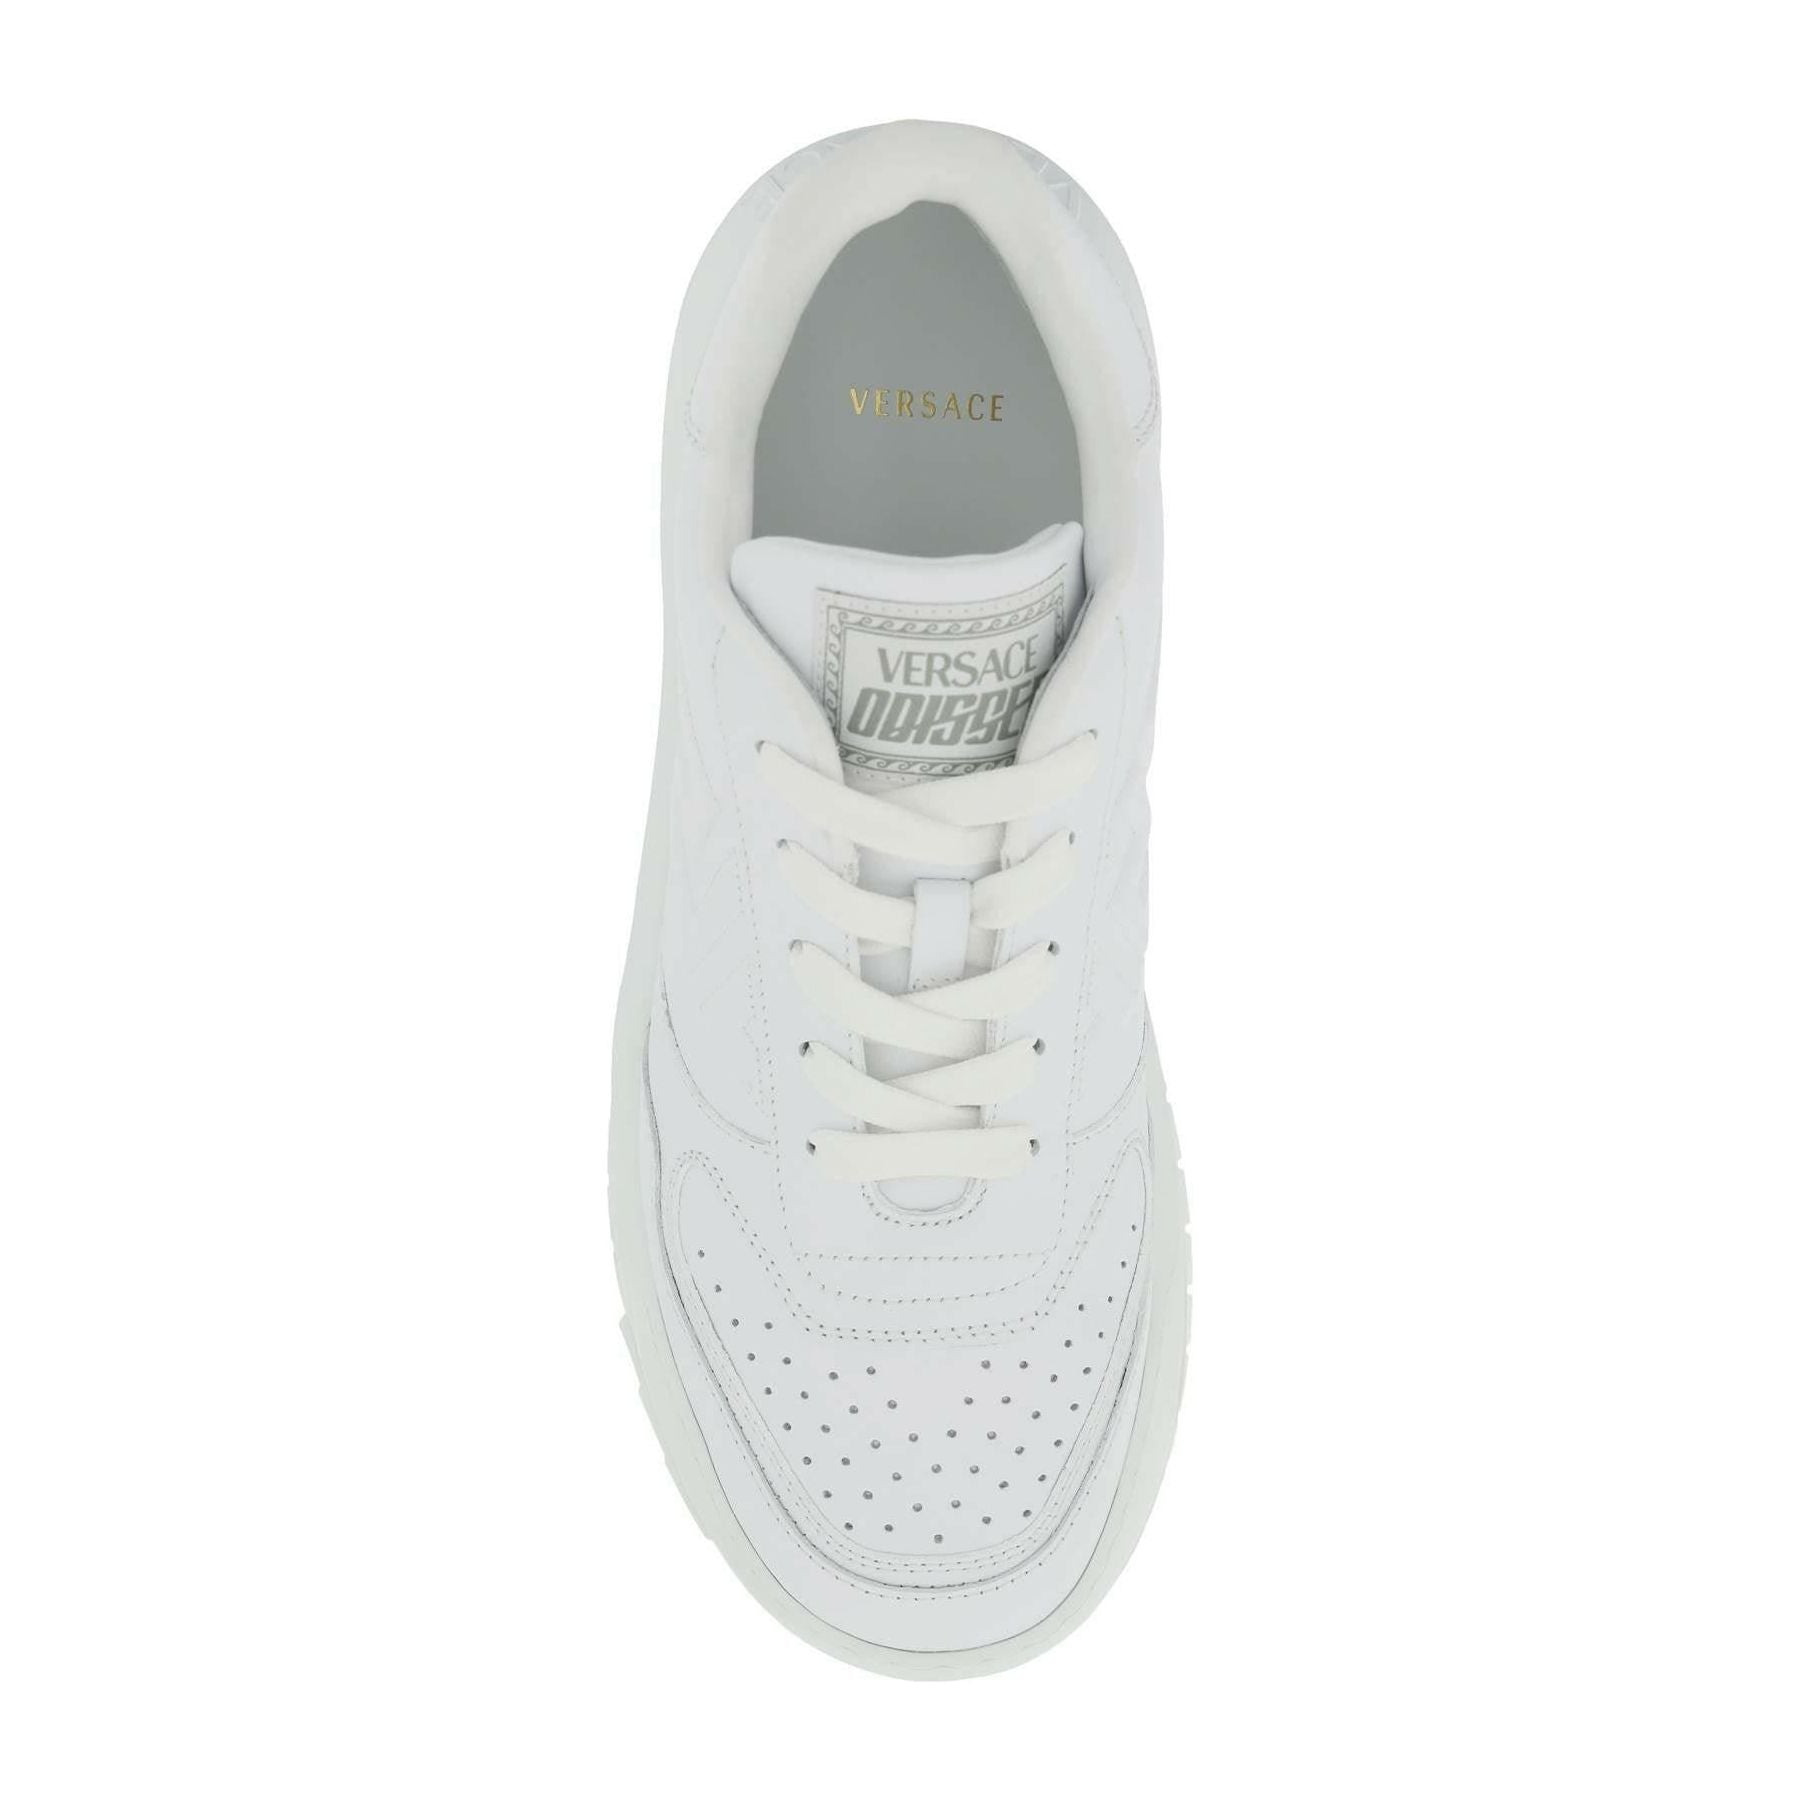 Optical White Leather Odissea Sneakers With Lettering Print On Heel VERSACE JOHN JULIA.